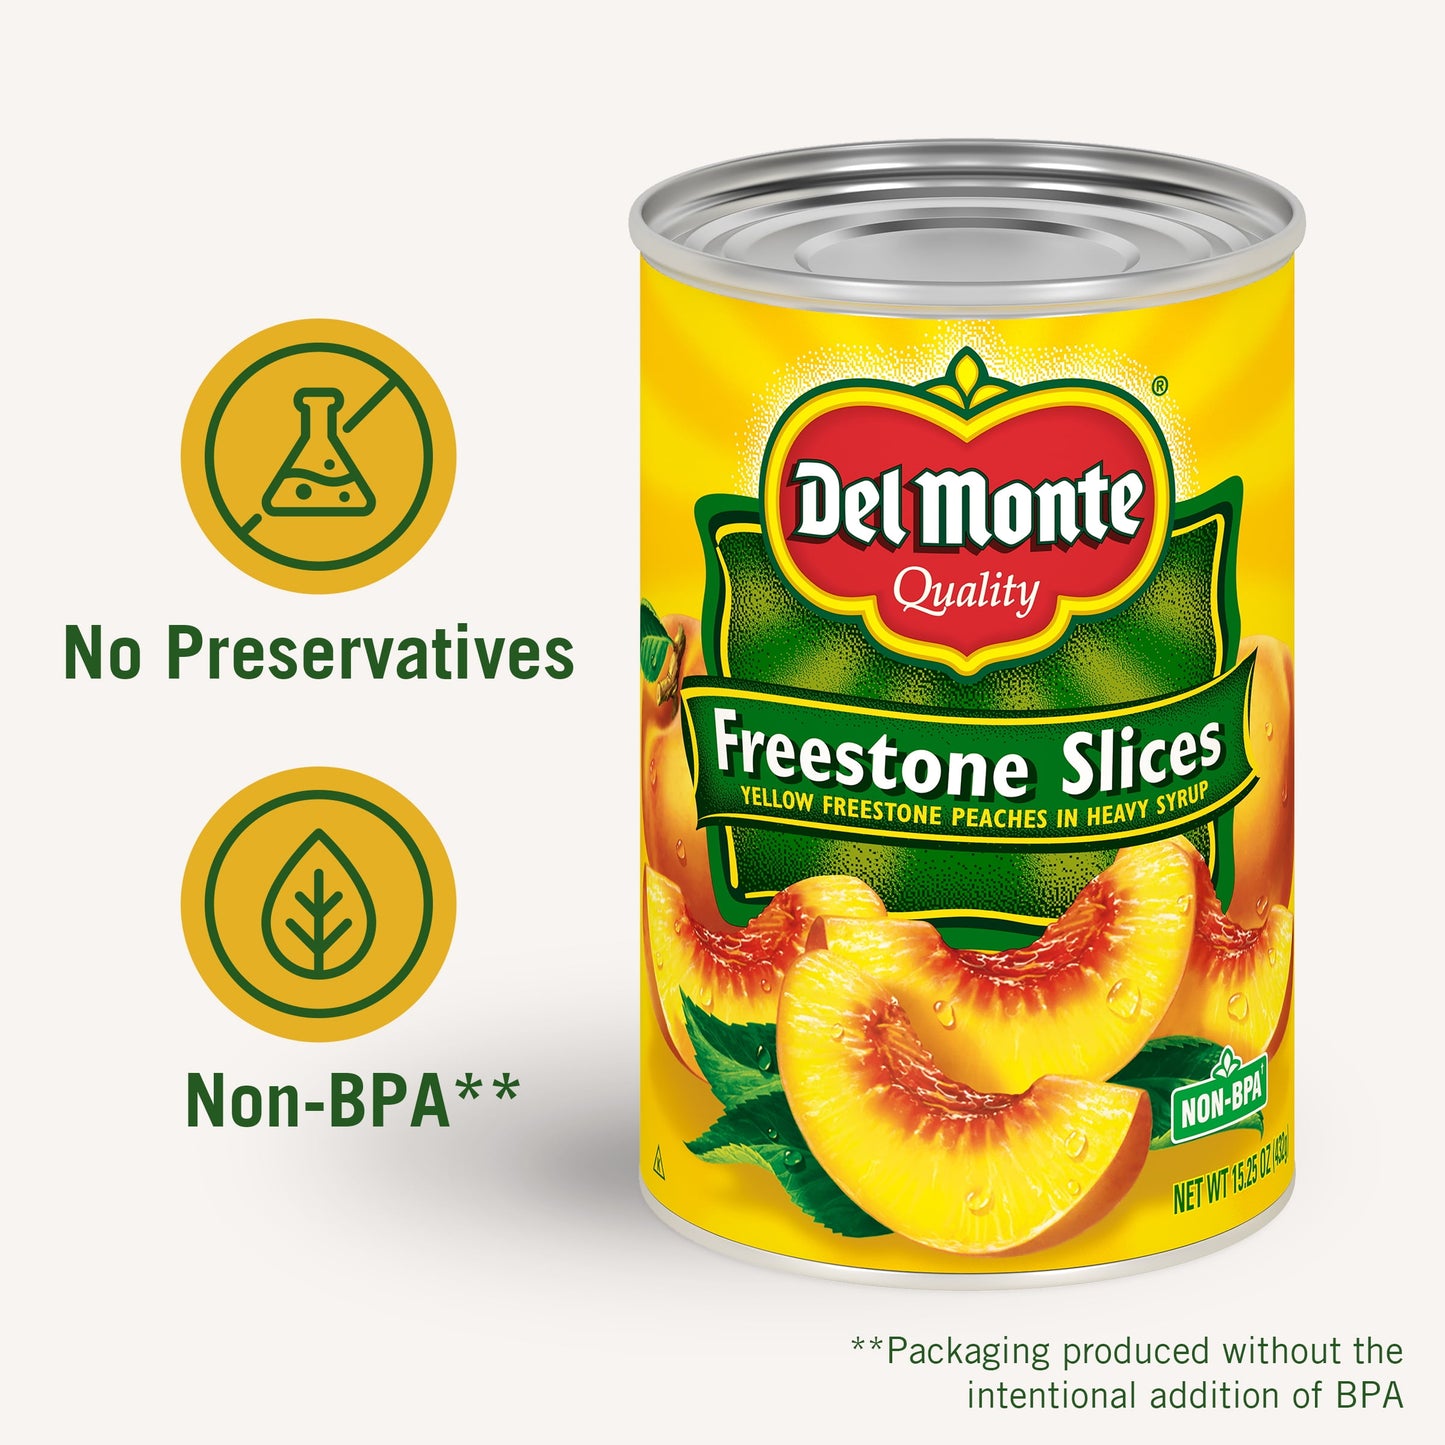 Del Monte Yellow Freestone Sliced Peaches, Canned Fruit, 15.25 oz Can